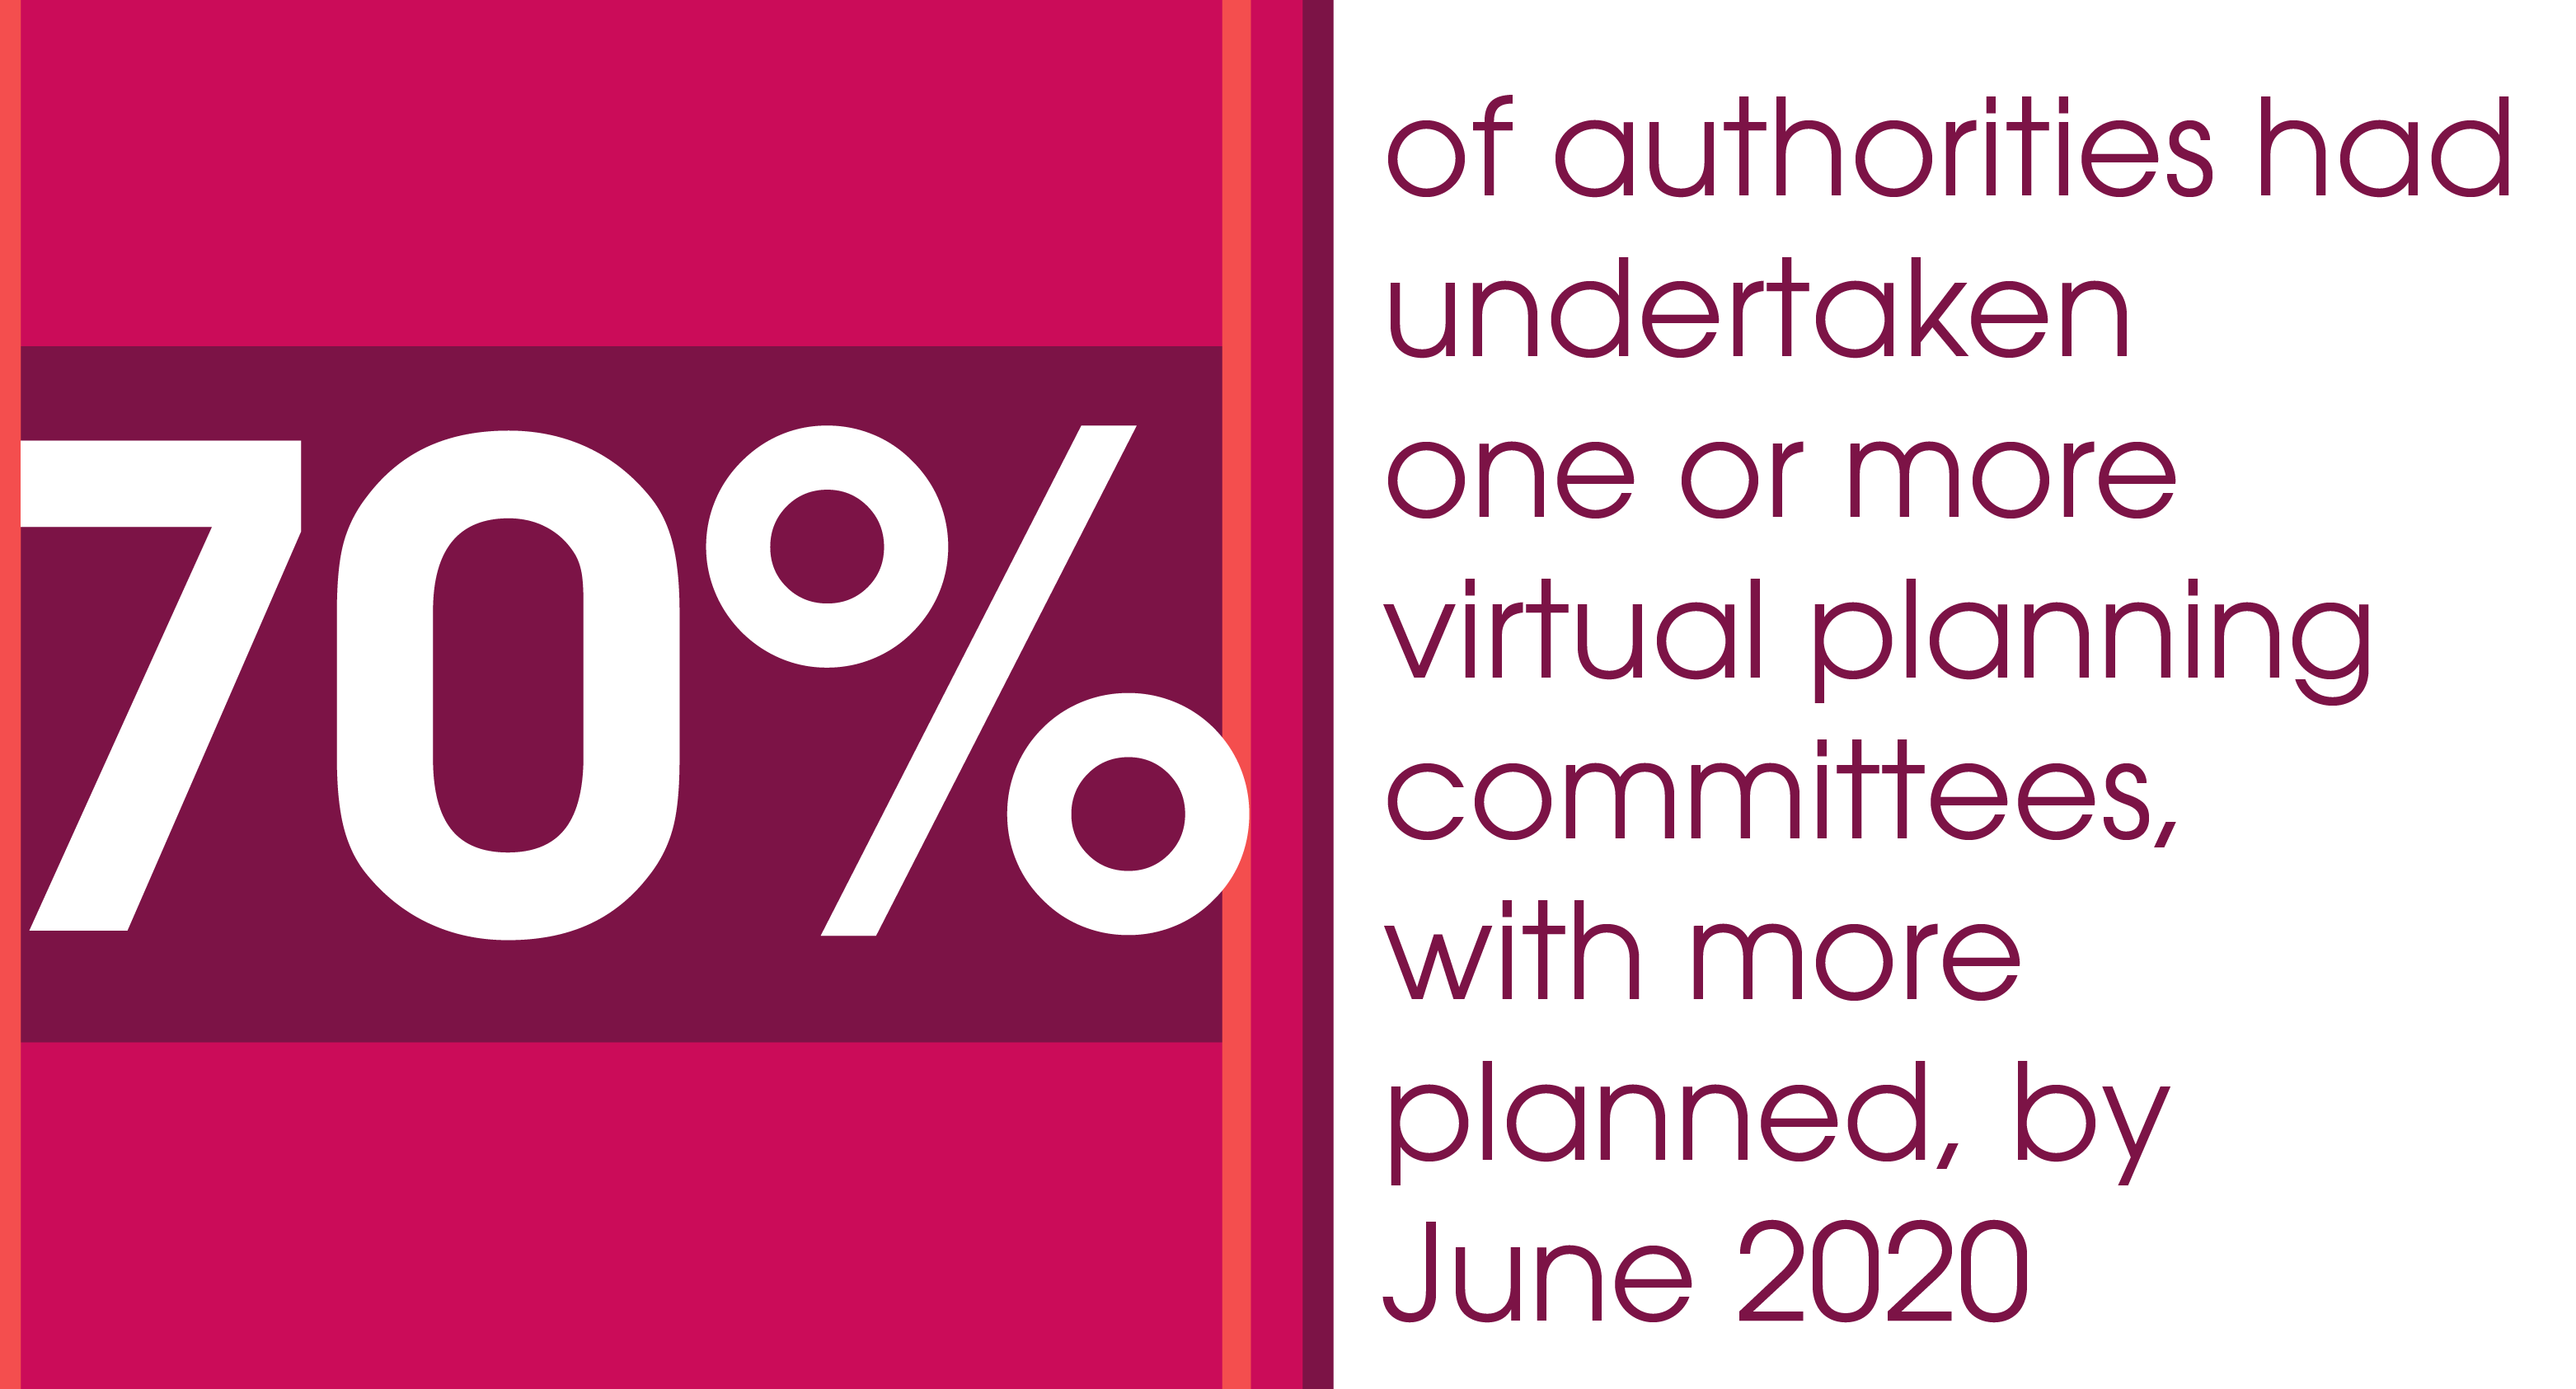 70% of authorities had undertaken one or more virtual planning committees, with more planned, by June 2020.